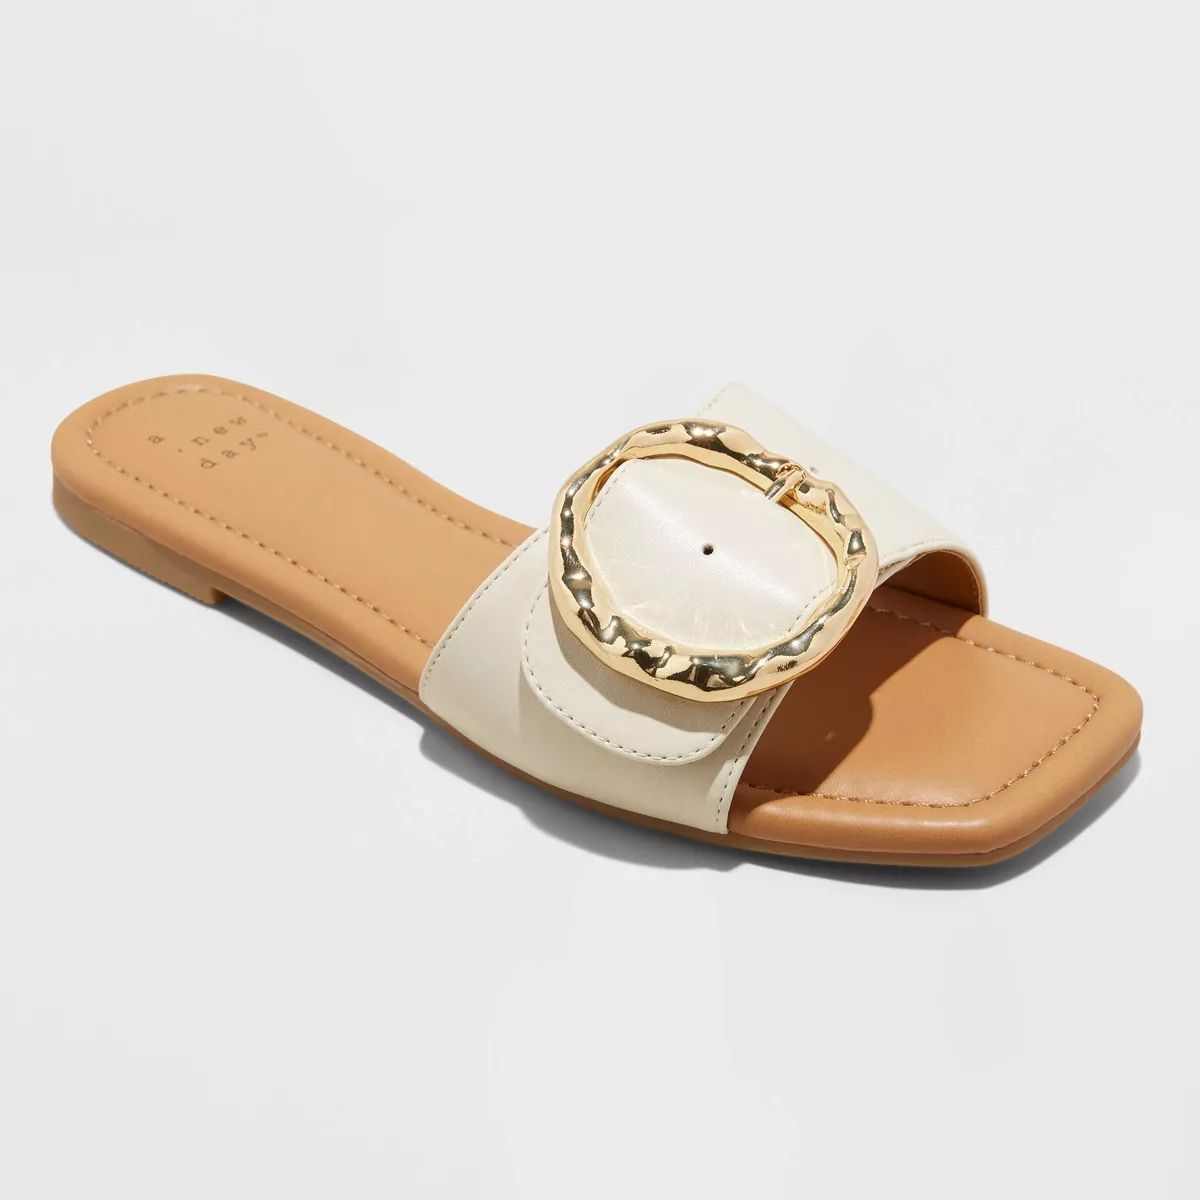 Women's Bennie Buckle Slide Sandals with Memory Foam Insole - A New Day™ Cream 8.5 | Target